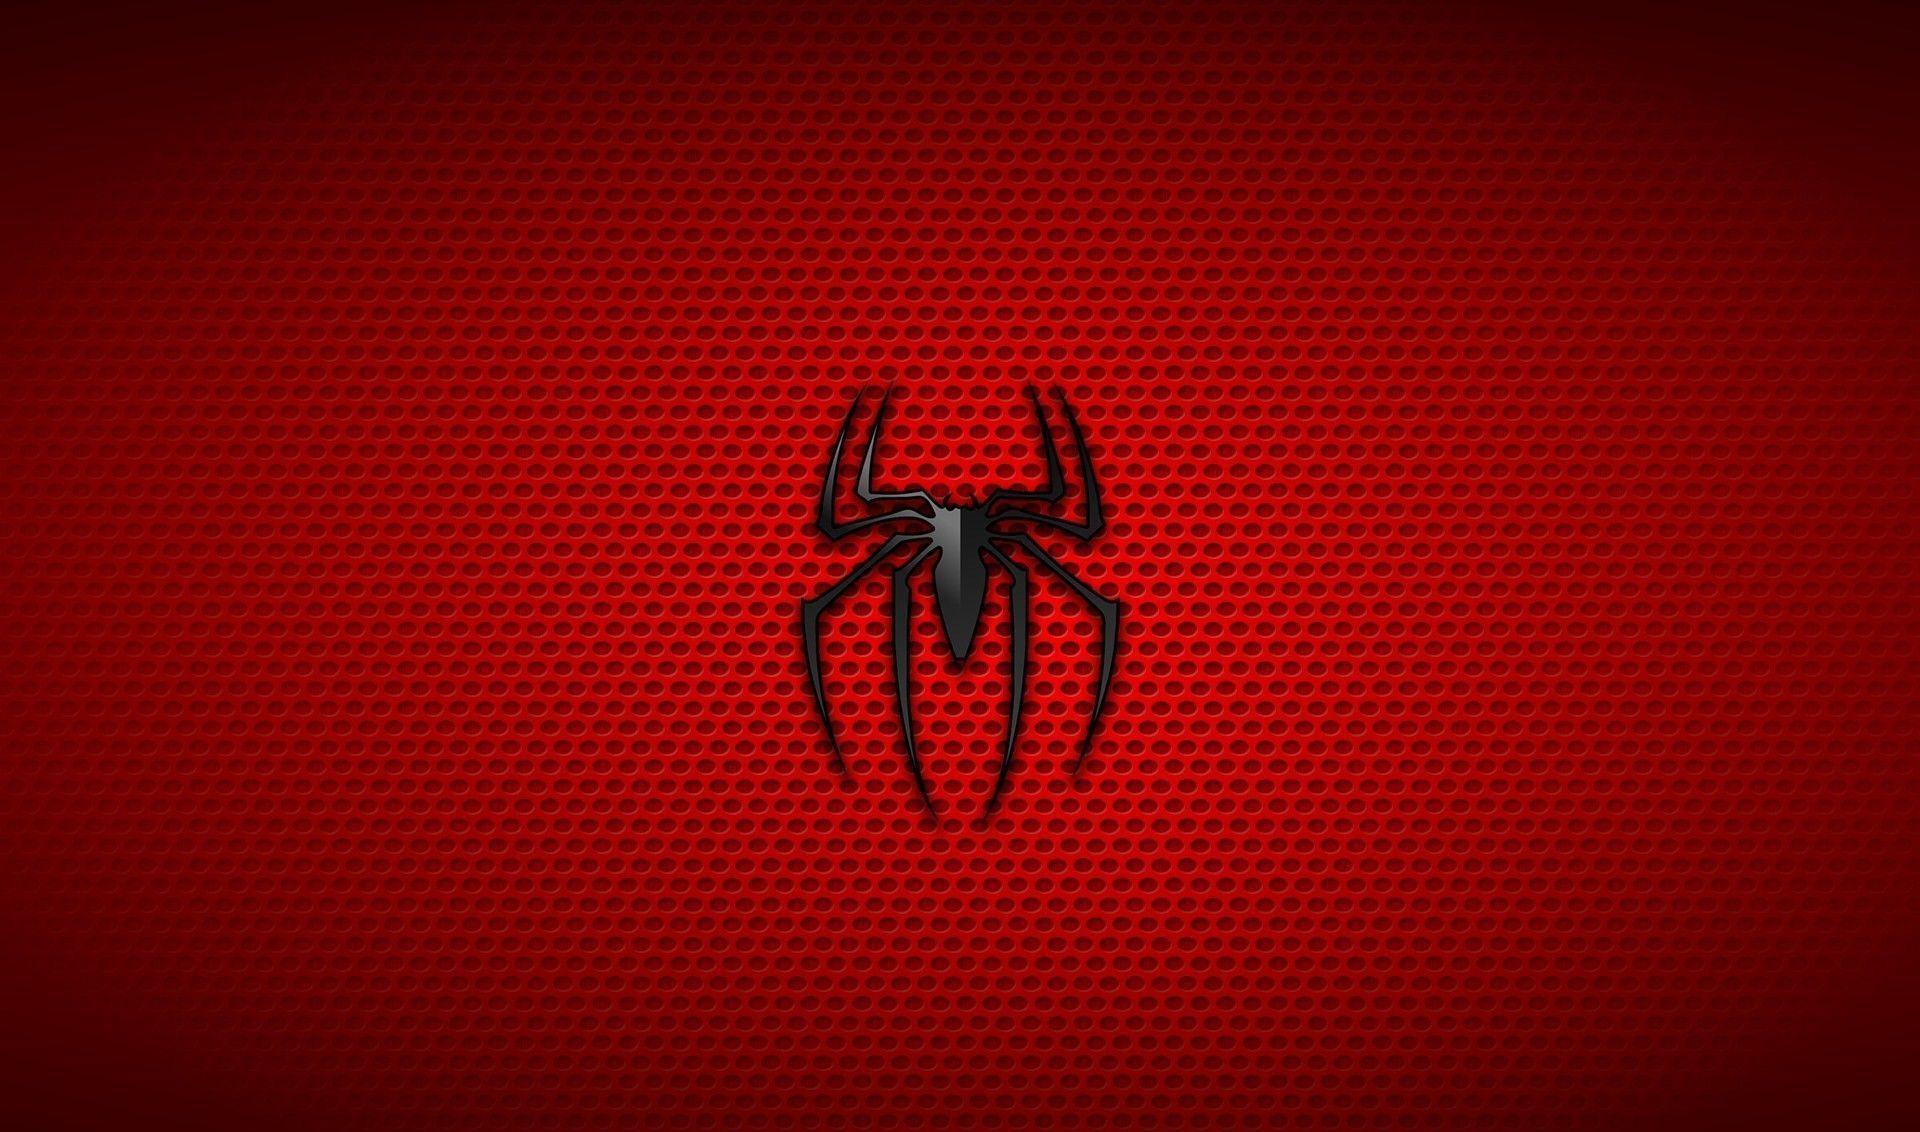 Spiderman Wallpaper for PC Full HD Picture 1920×1080 Wallpaper